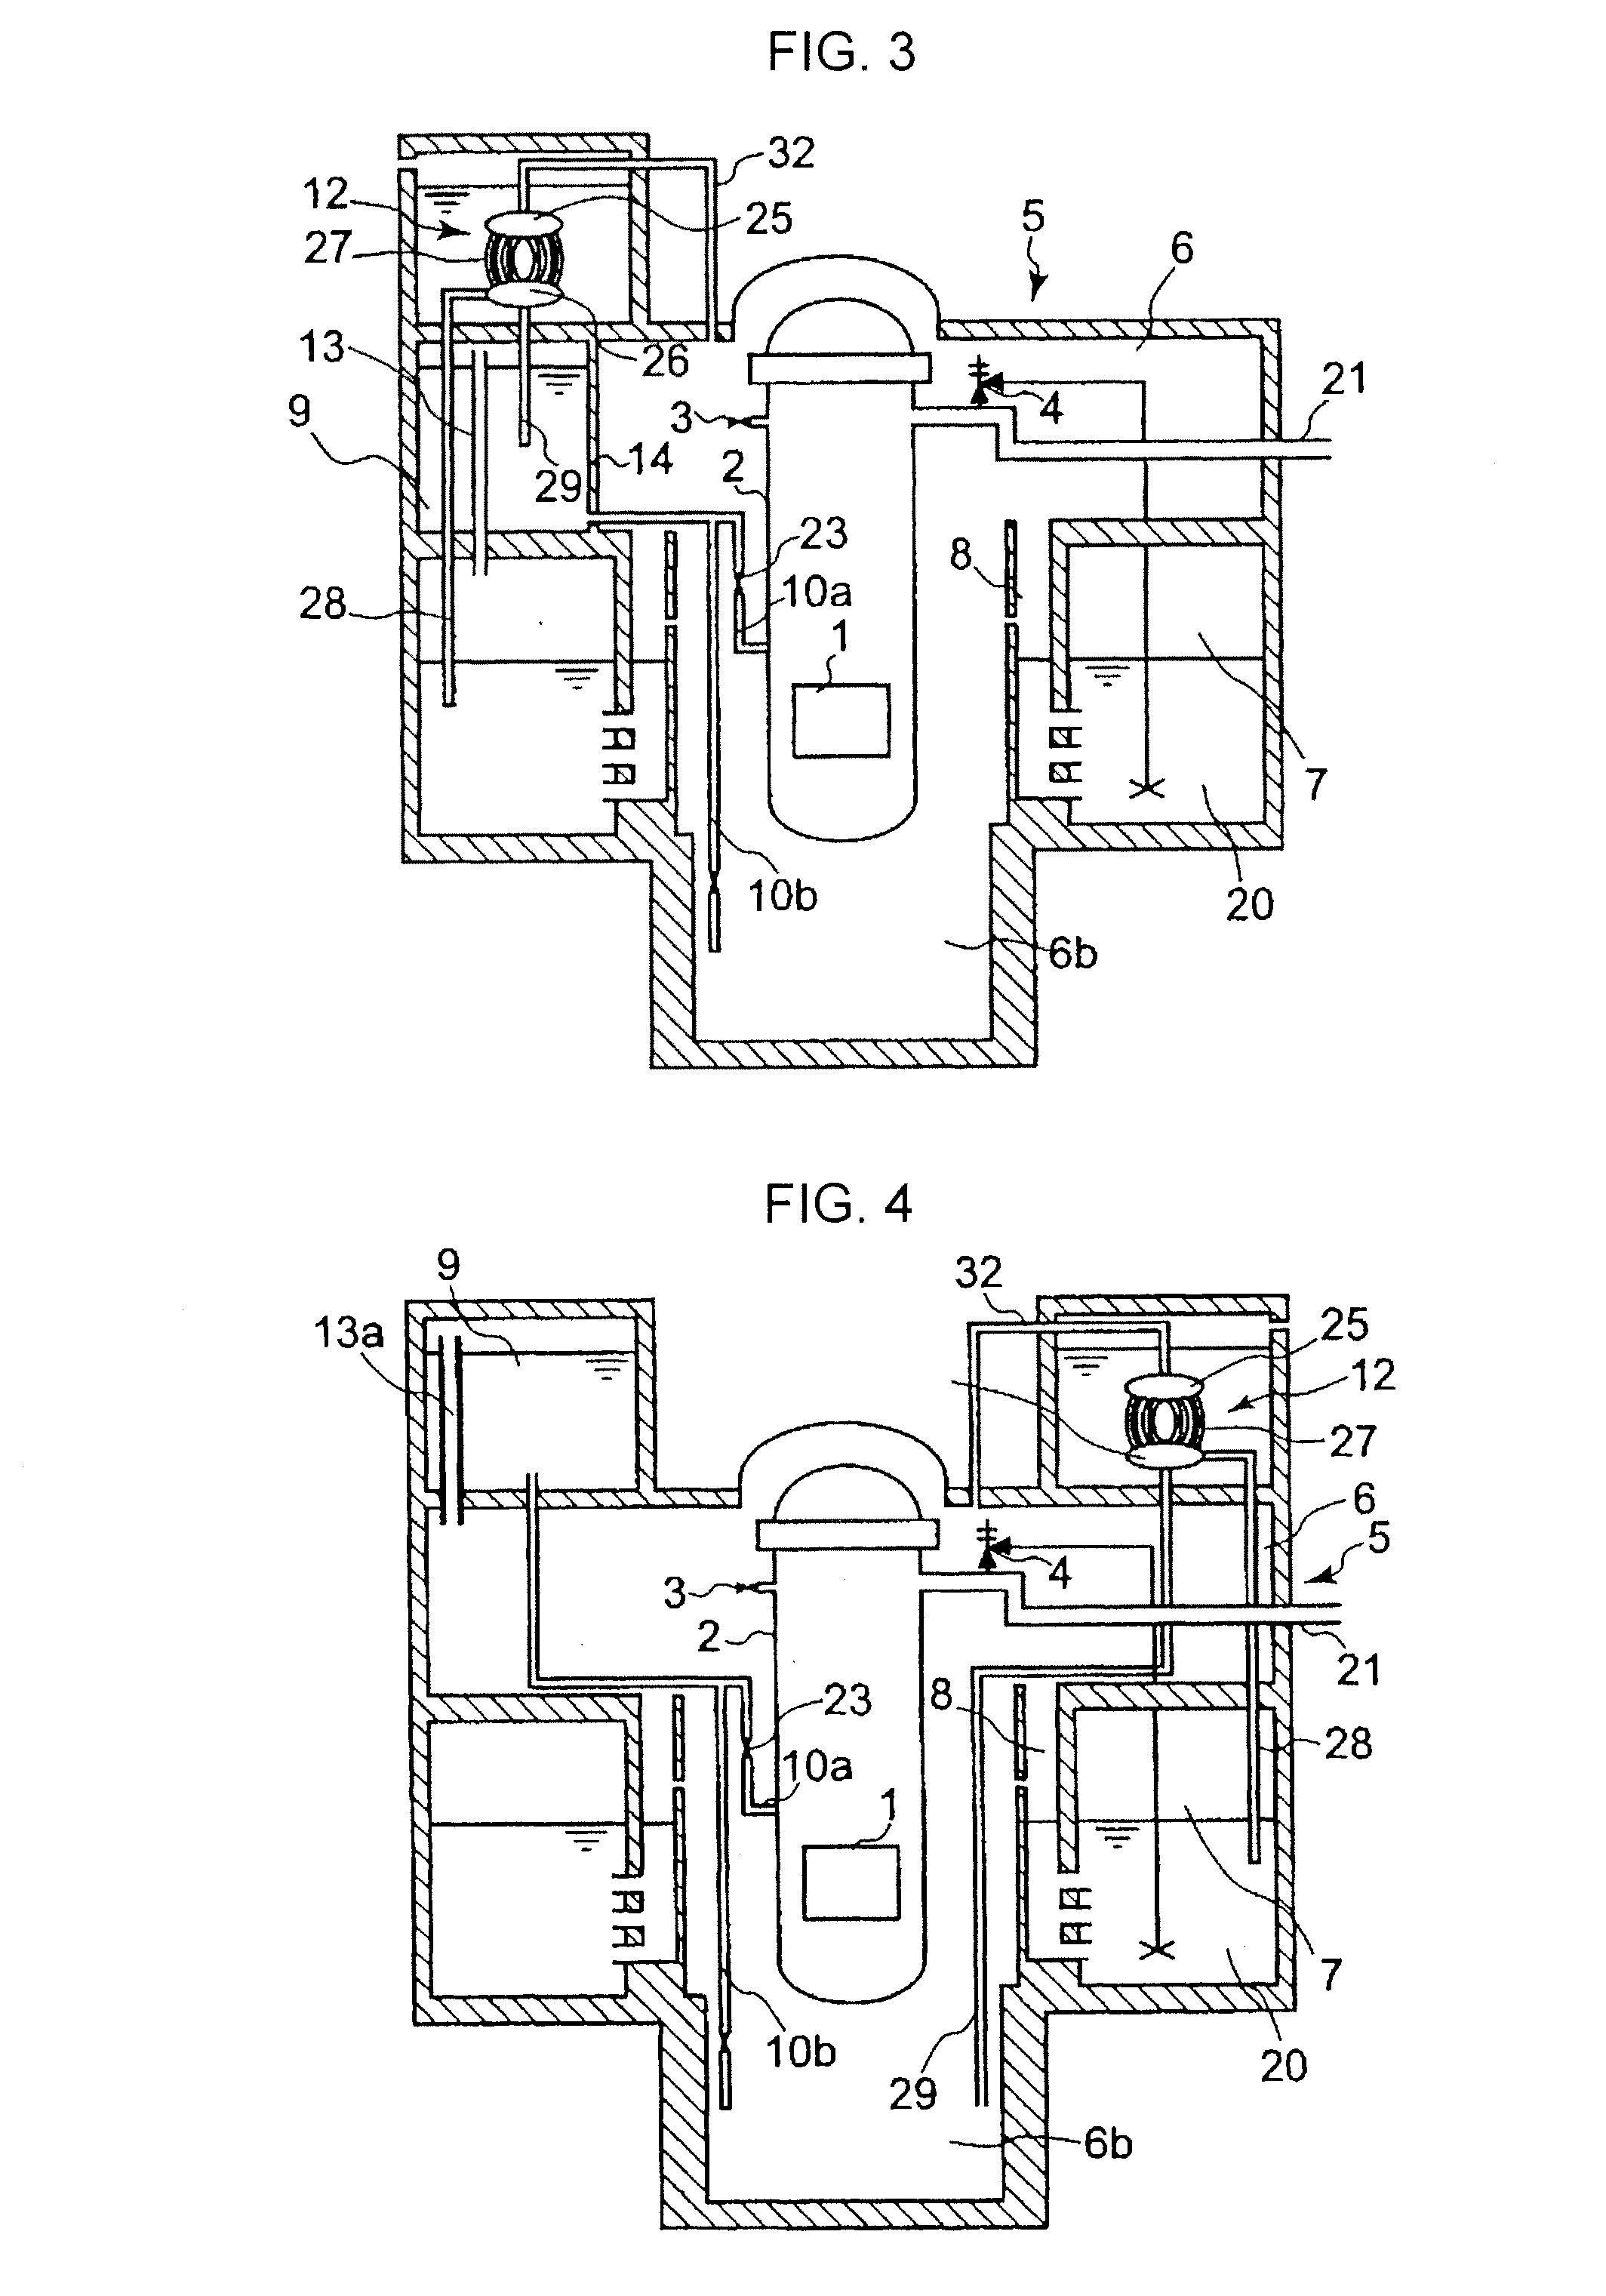 Boiling water nuclear reactor and emergency core cooling system of the same